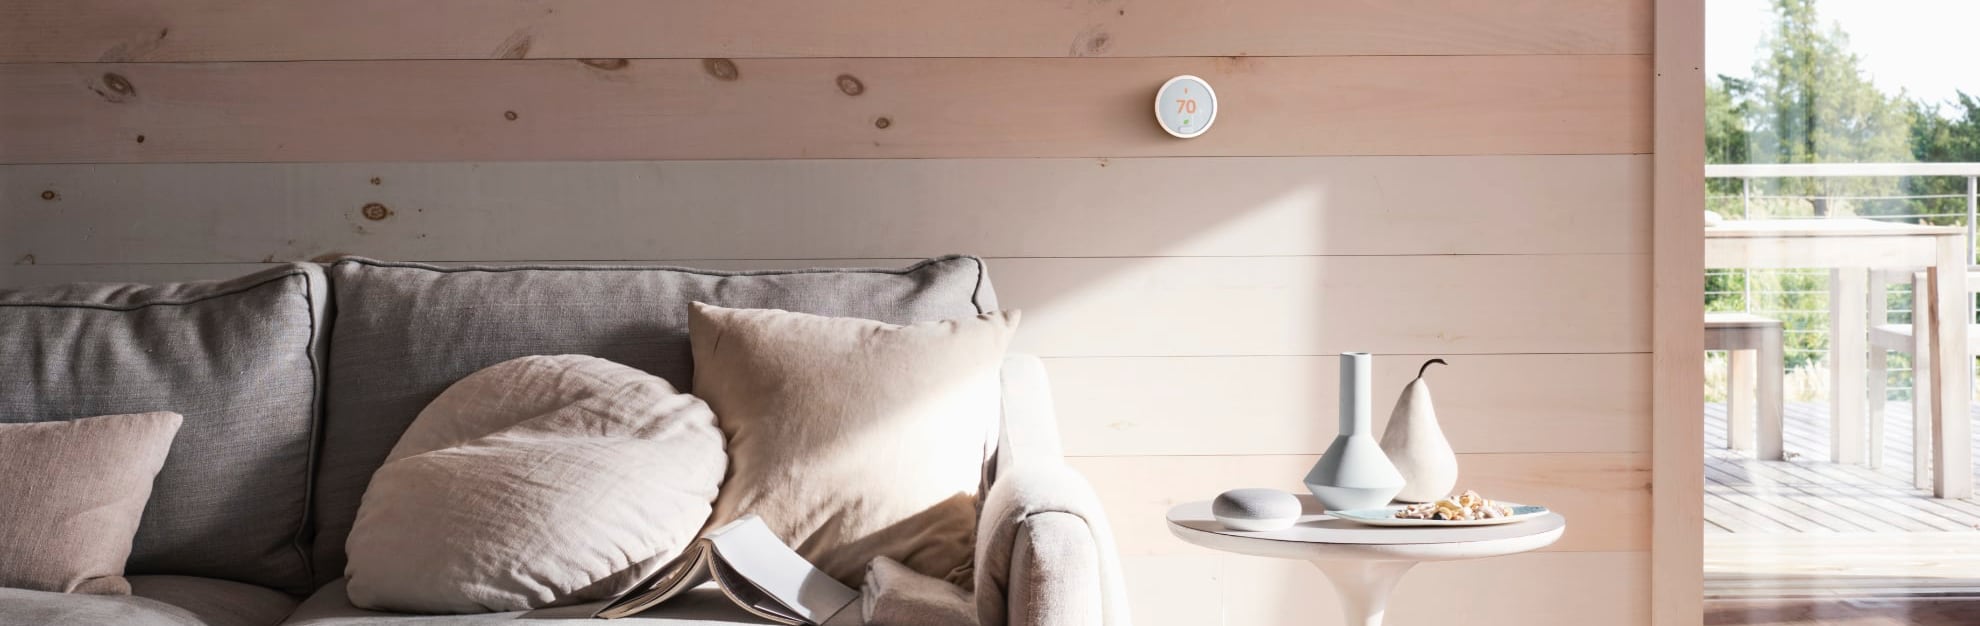 Vivint Home Automation in Newark